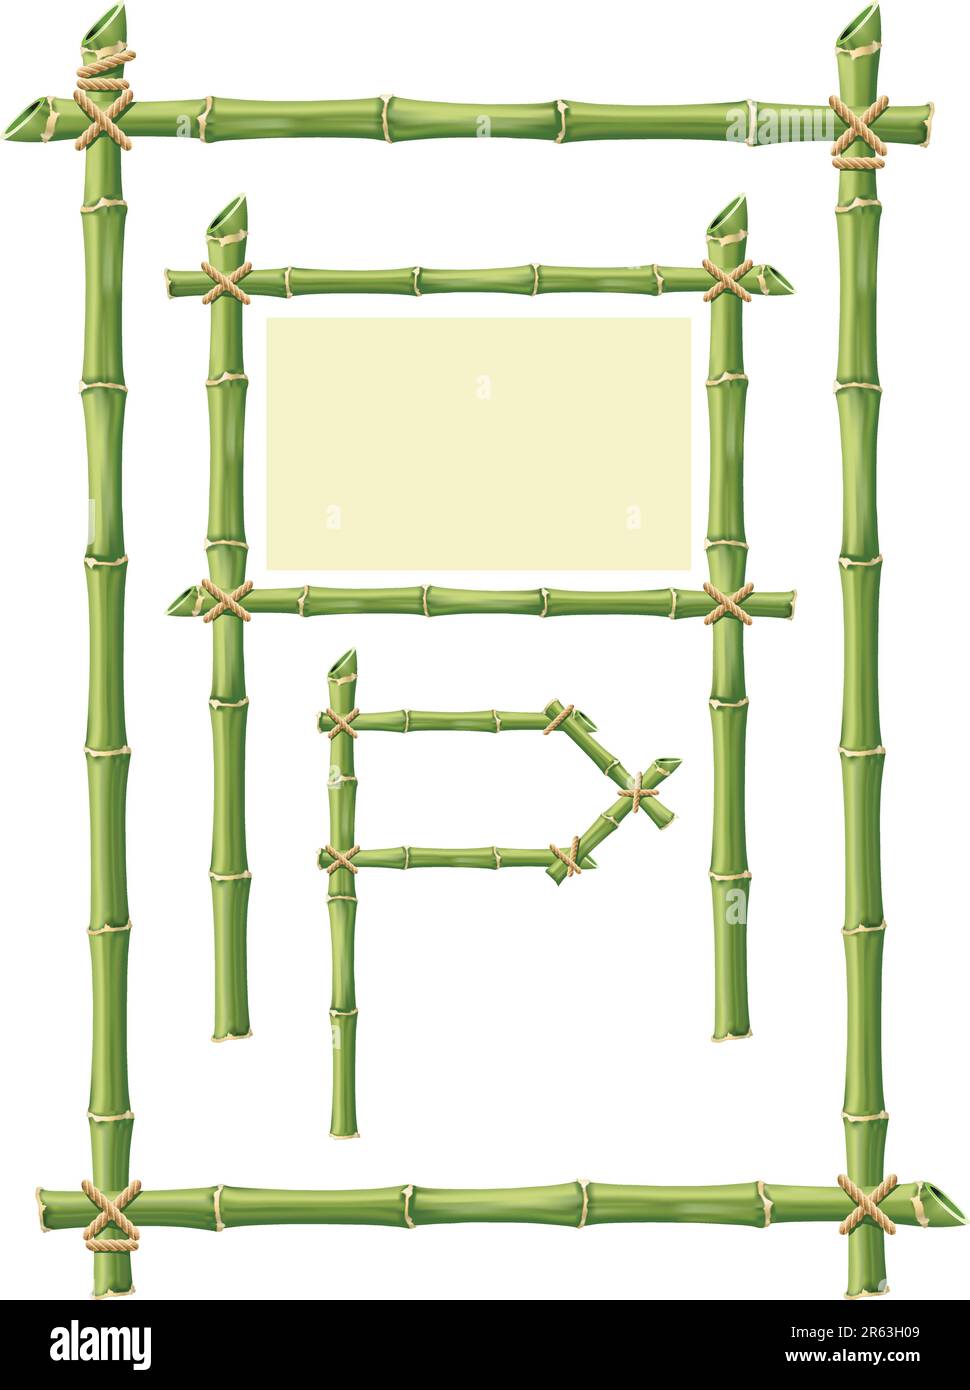 Bamboo frame isolated on white Stock Vector